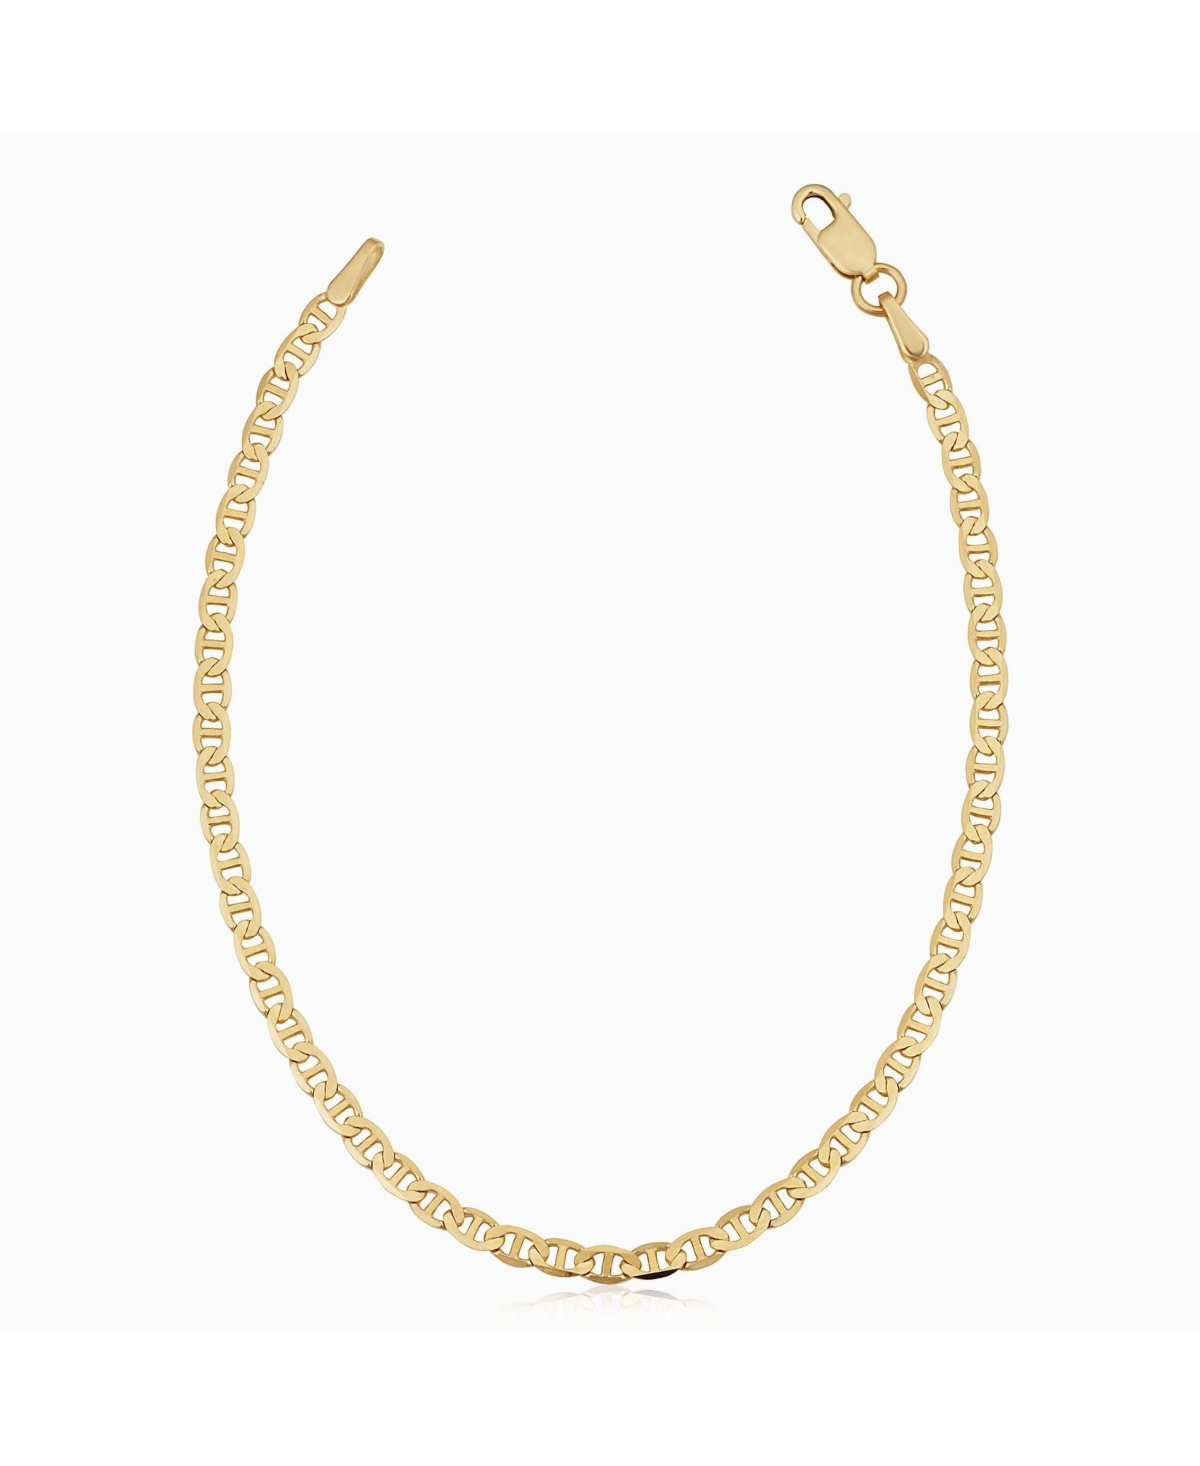 ORADINA MYSTIC MARINER ANKLET IN 14K YELLOW GOLD